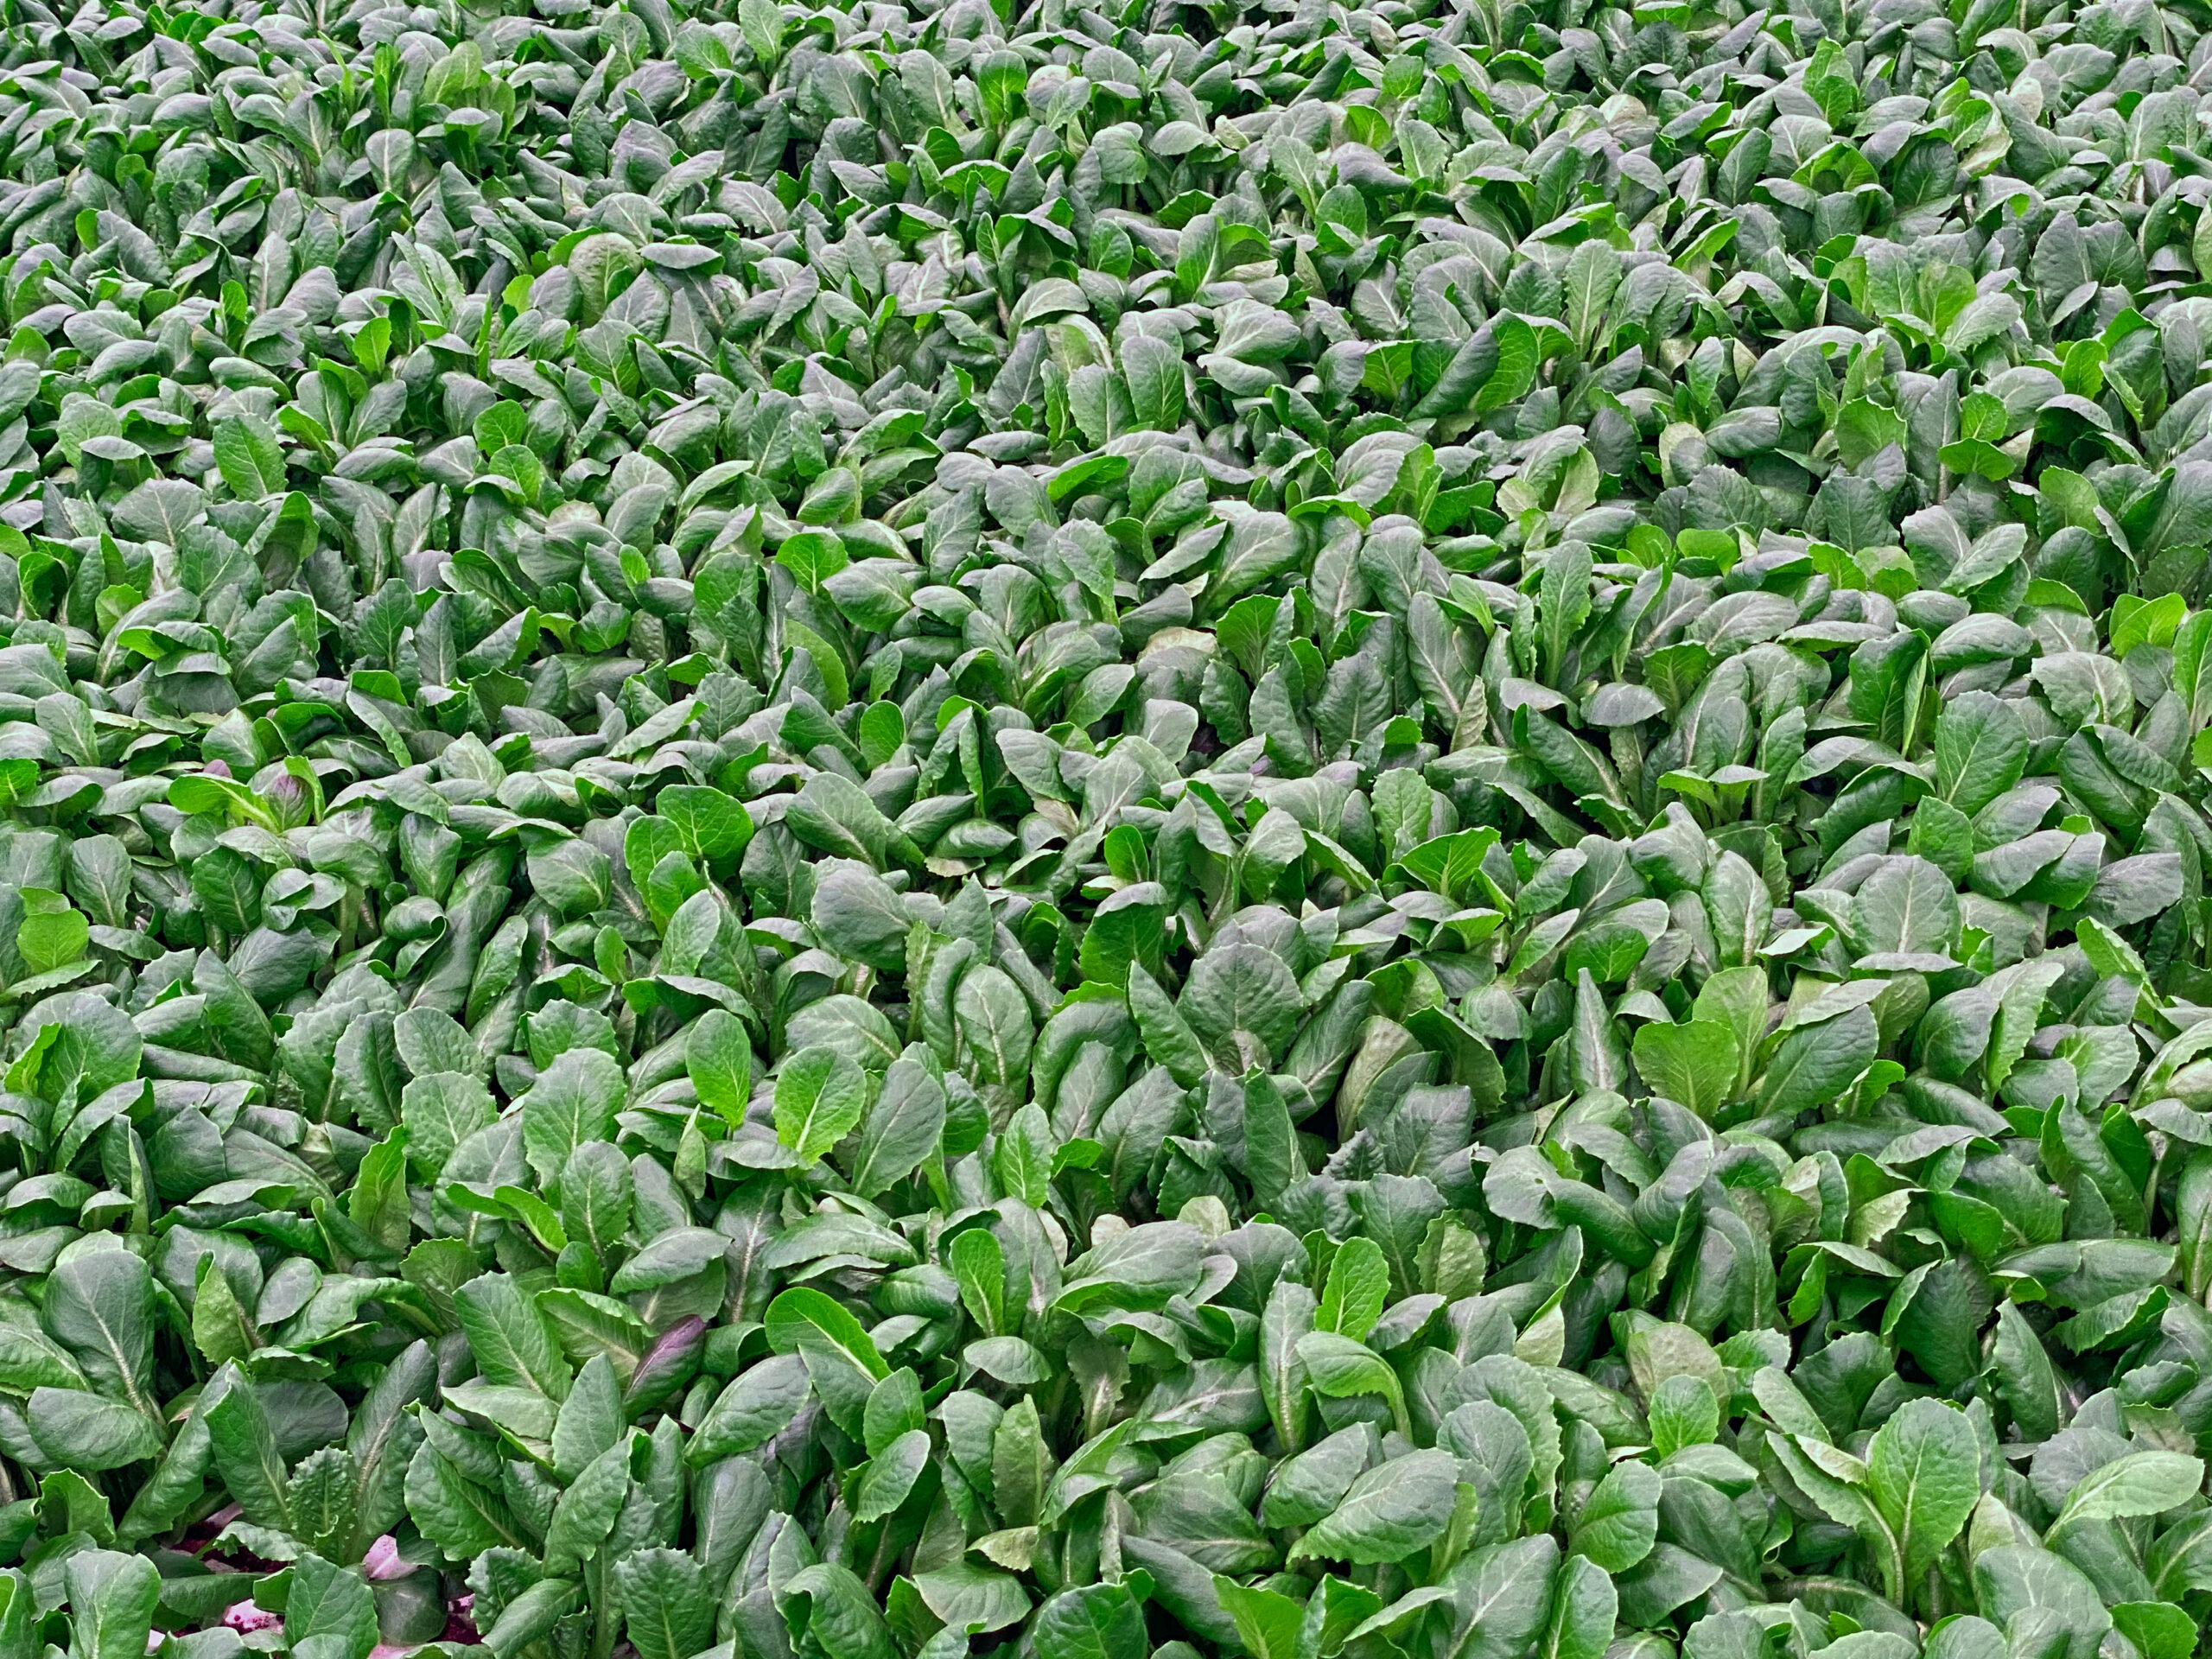 Featured image for “Lakeland Fresh Farms sets the bar for hydroponically grown greens”